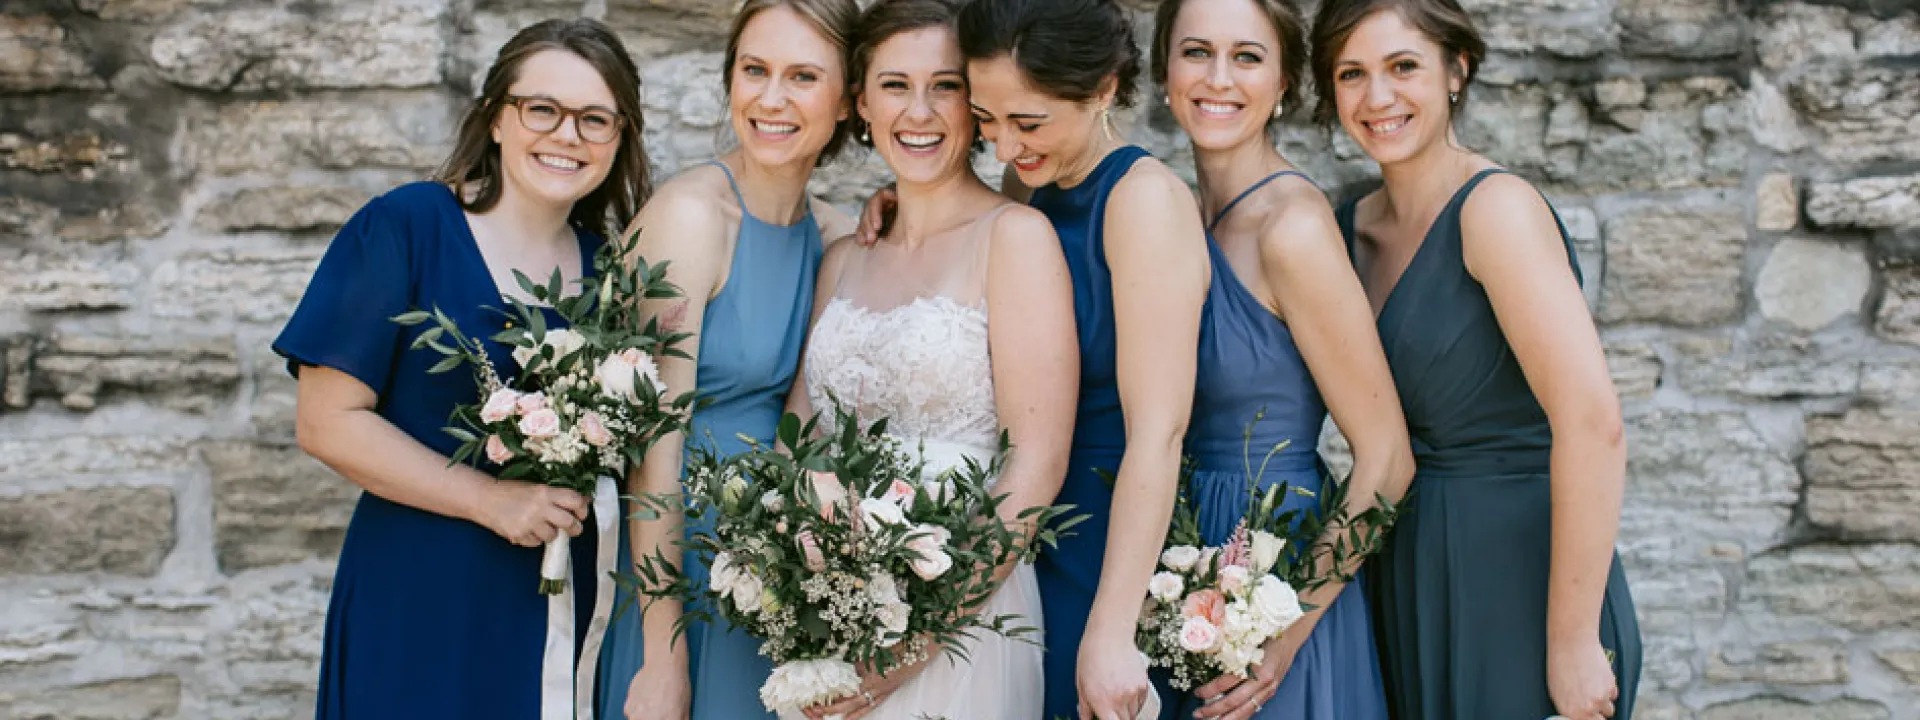 Bridal Party at the Nicollet Island Pavilion